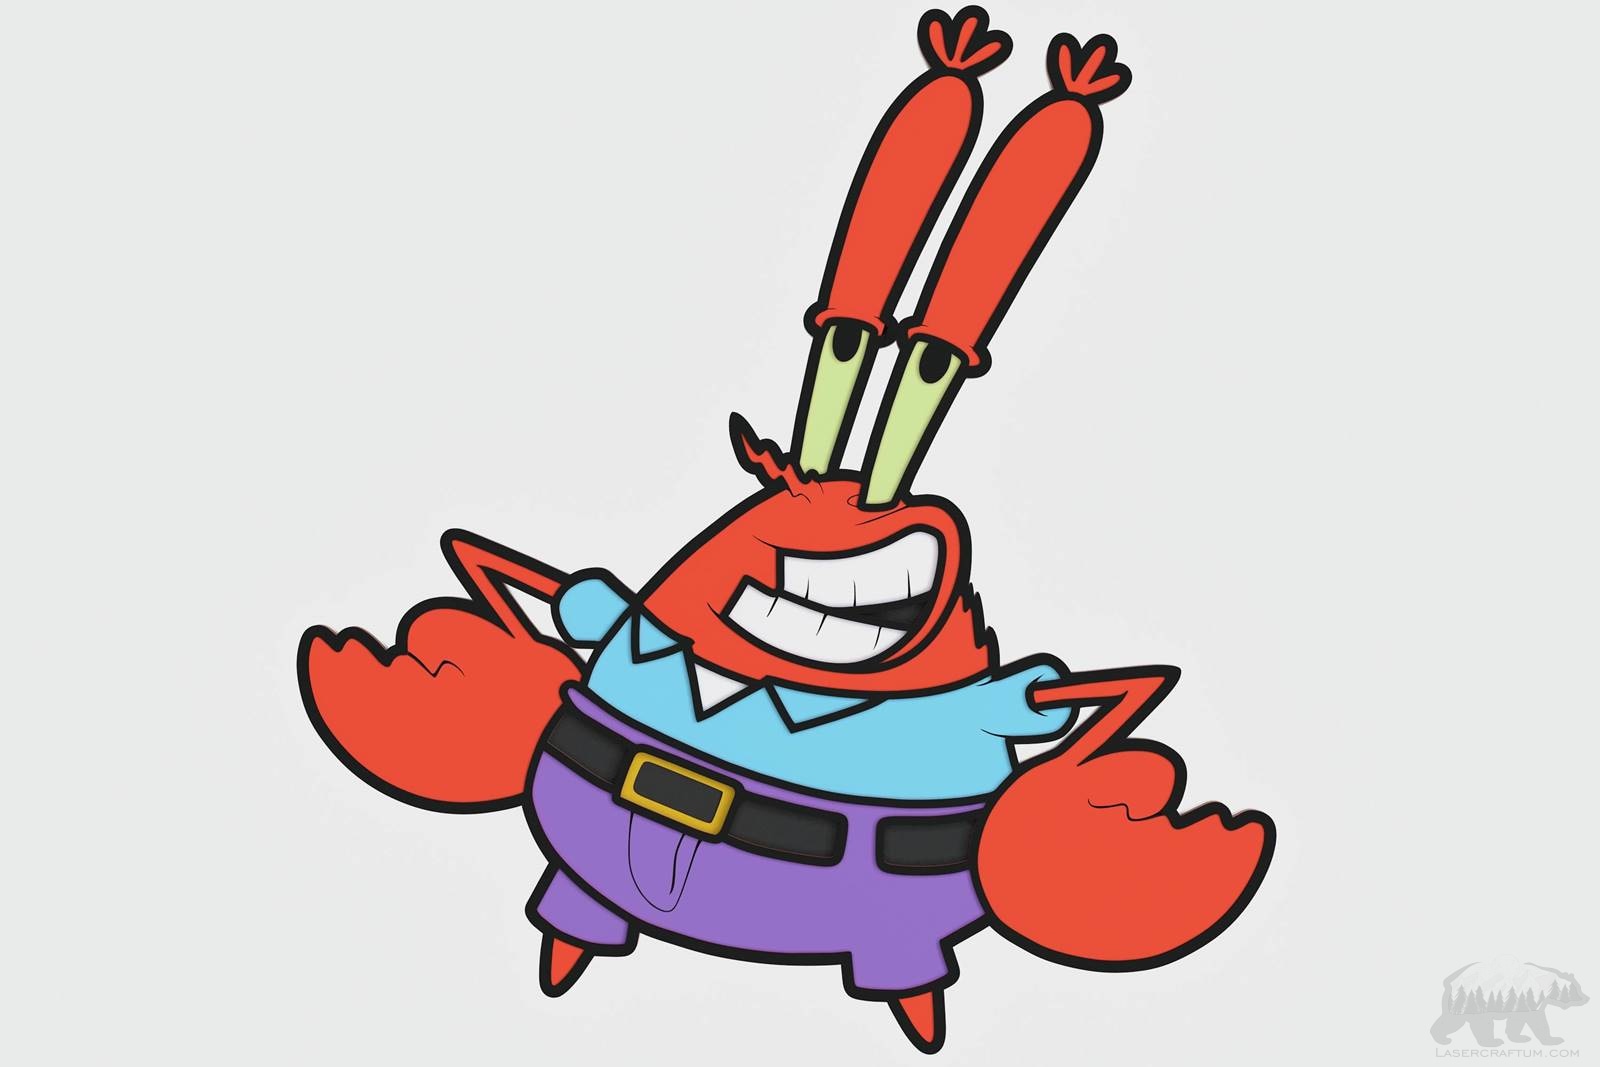 Mr. Crabs Layered Design for cutting